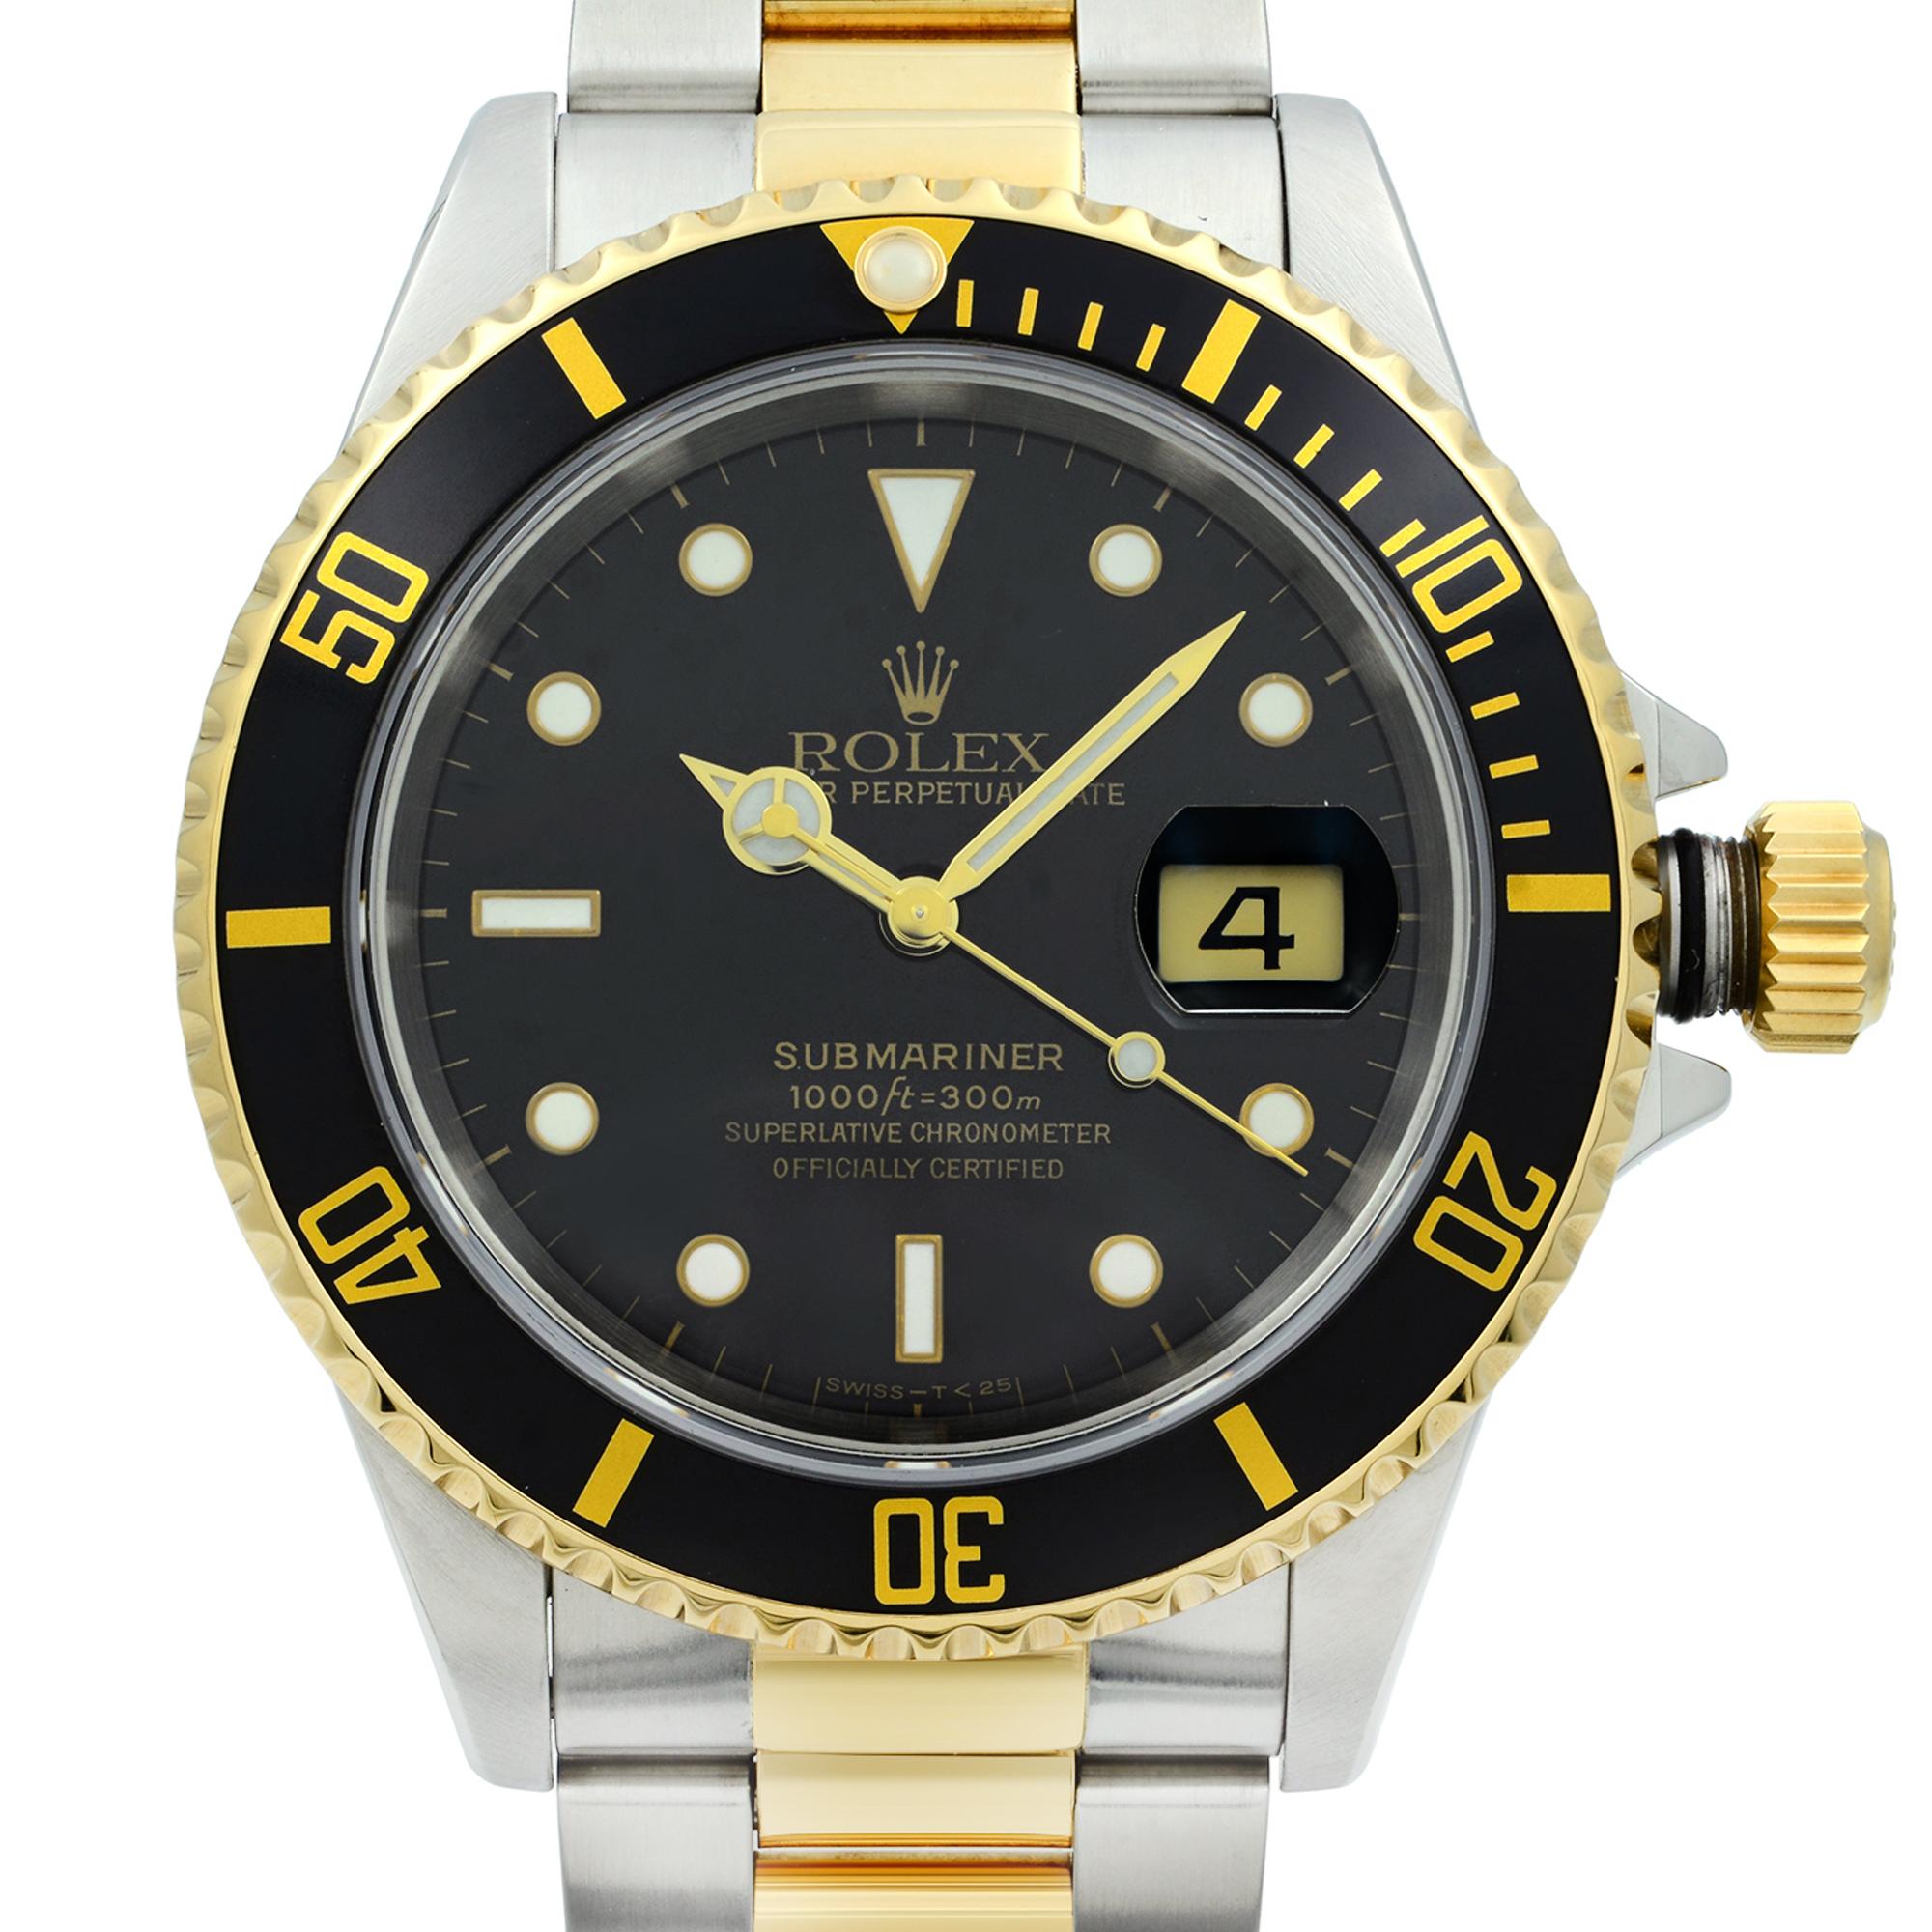 Tritium Dial. Good Condition. Tiny scratches on the bezel insert. Pre-owned Rolex Submariner 40mm Holes 18K Yellow Gold Steel Automatic Watch 16613. Original Box and Papers are Included. Covered by a 3-year Chronostore Warranty.

Brand and Model